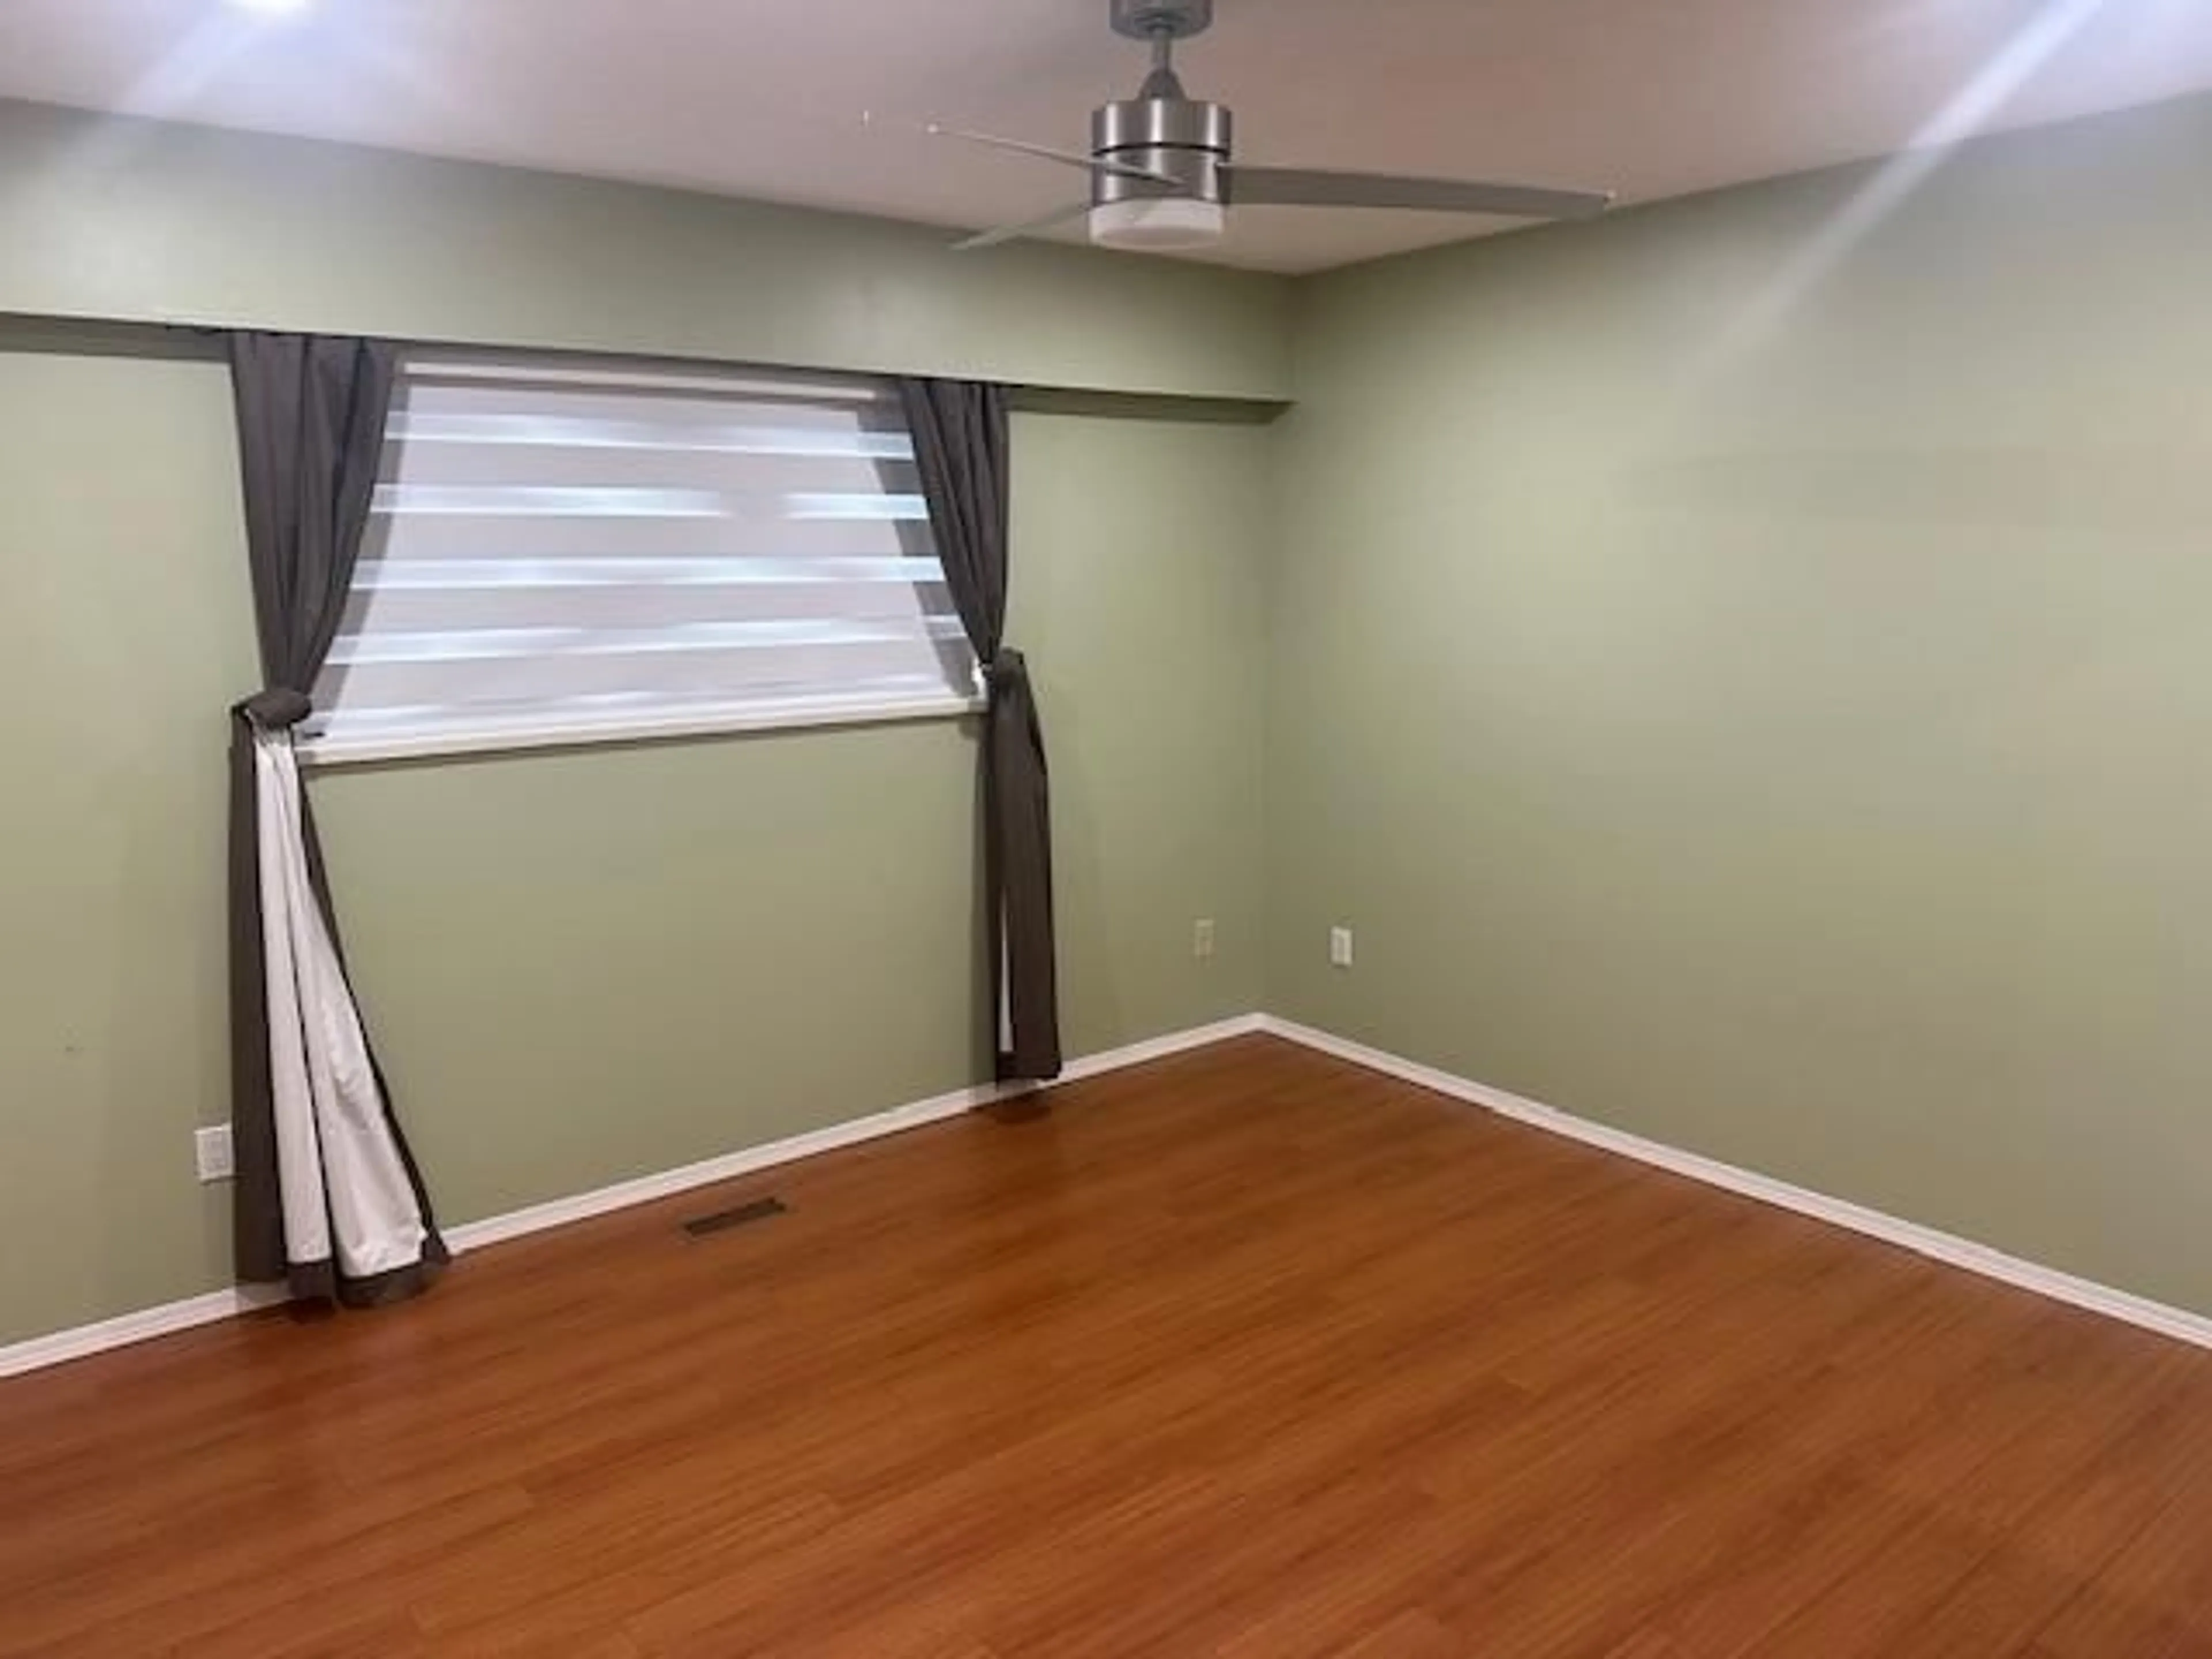 A pic of a room for 17390 58A AVENUE, Surrey British Columbia V3S1M8